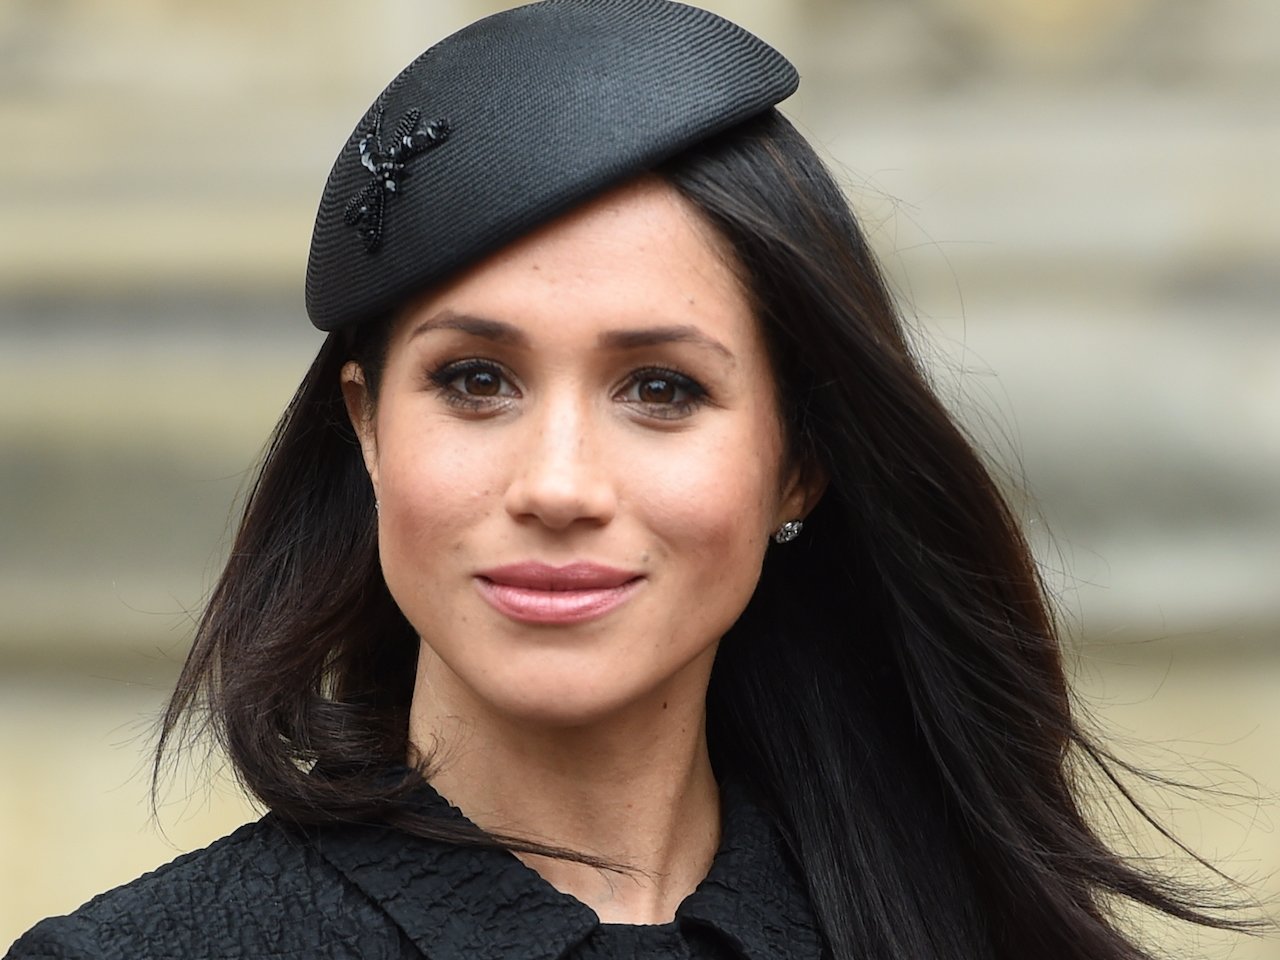 Let’s Not Kid Ourselves: Meghan Markle Can’t Change What The Monarchy Represents